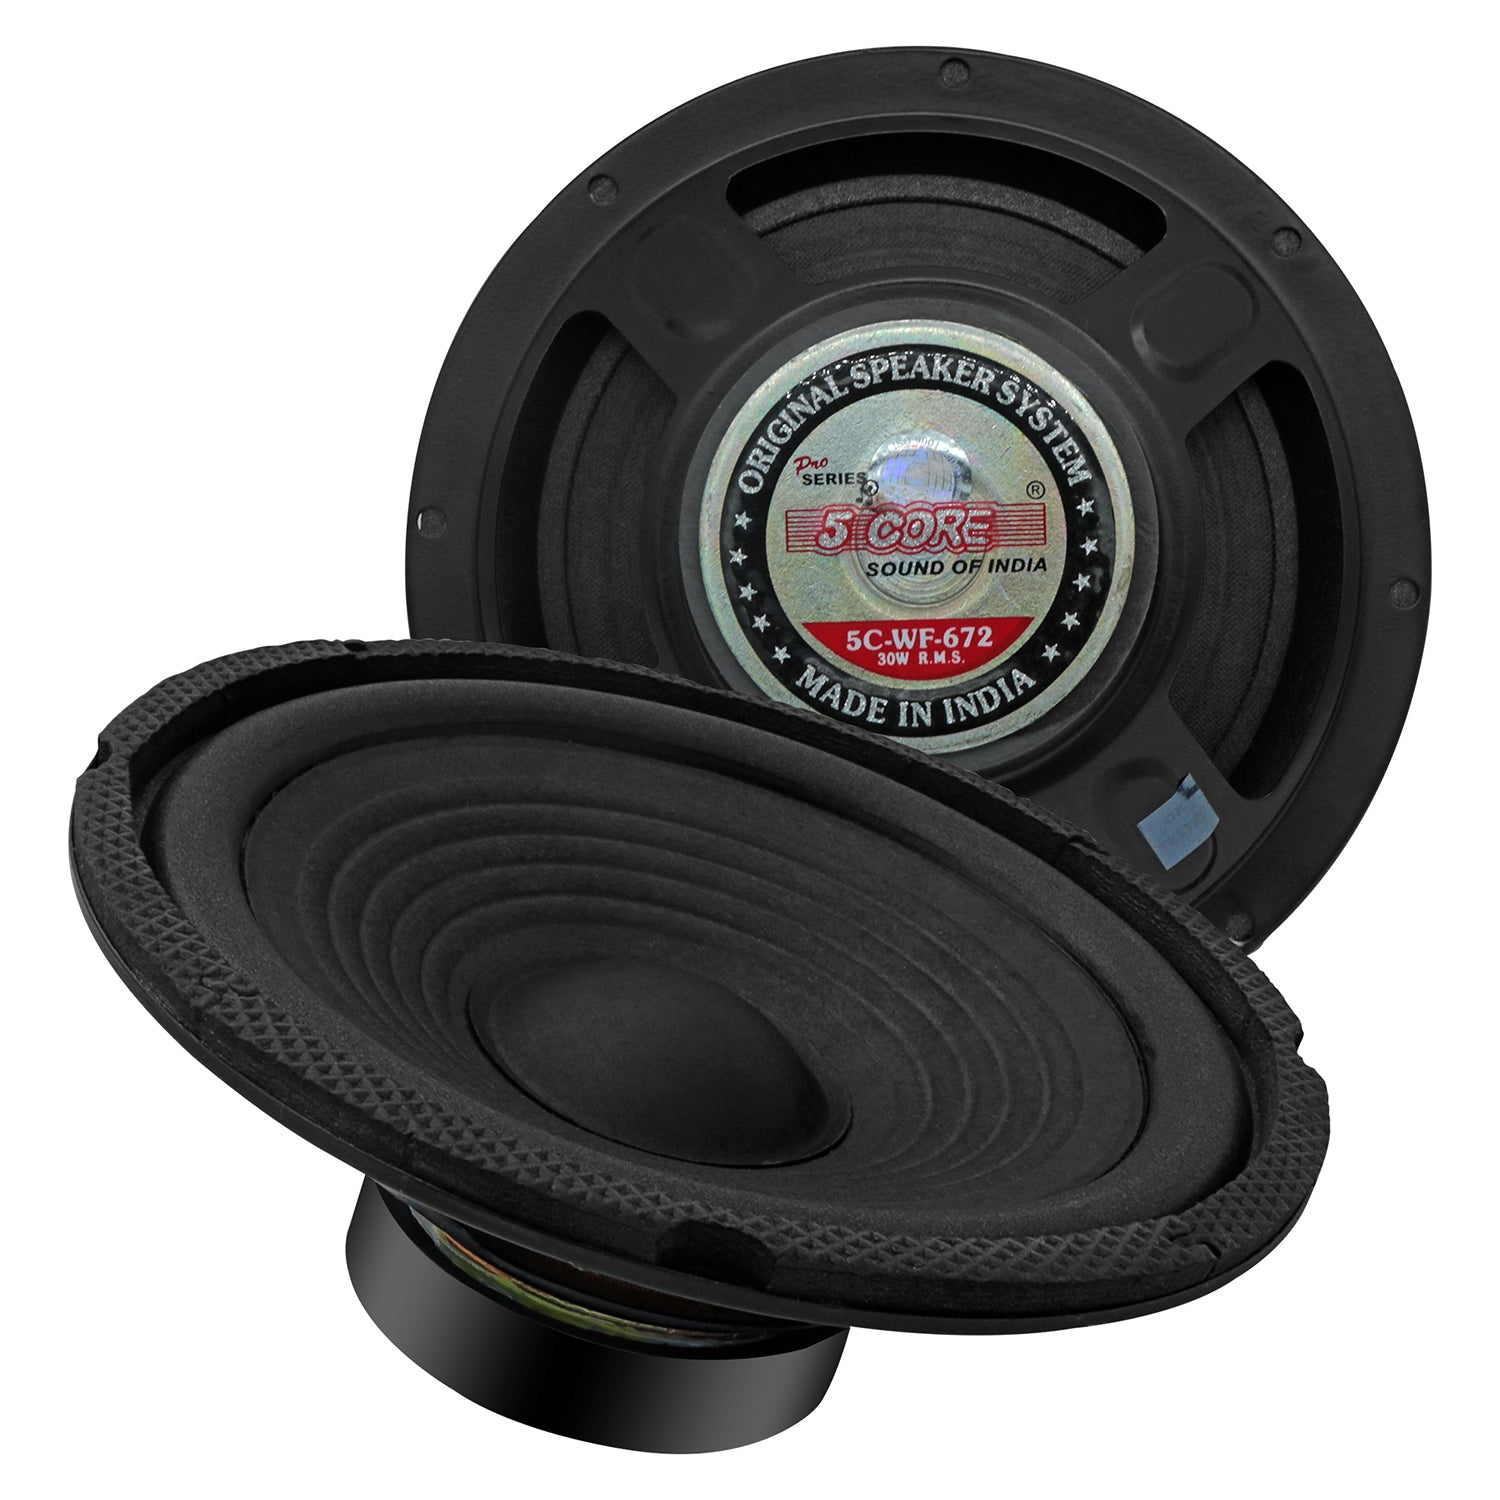 Upgrade Your Car Audio: 5Core's 6-Inch Subwoofer Speaker"